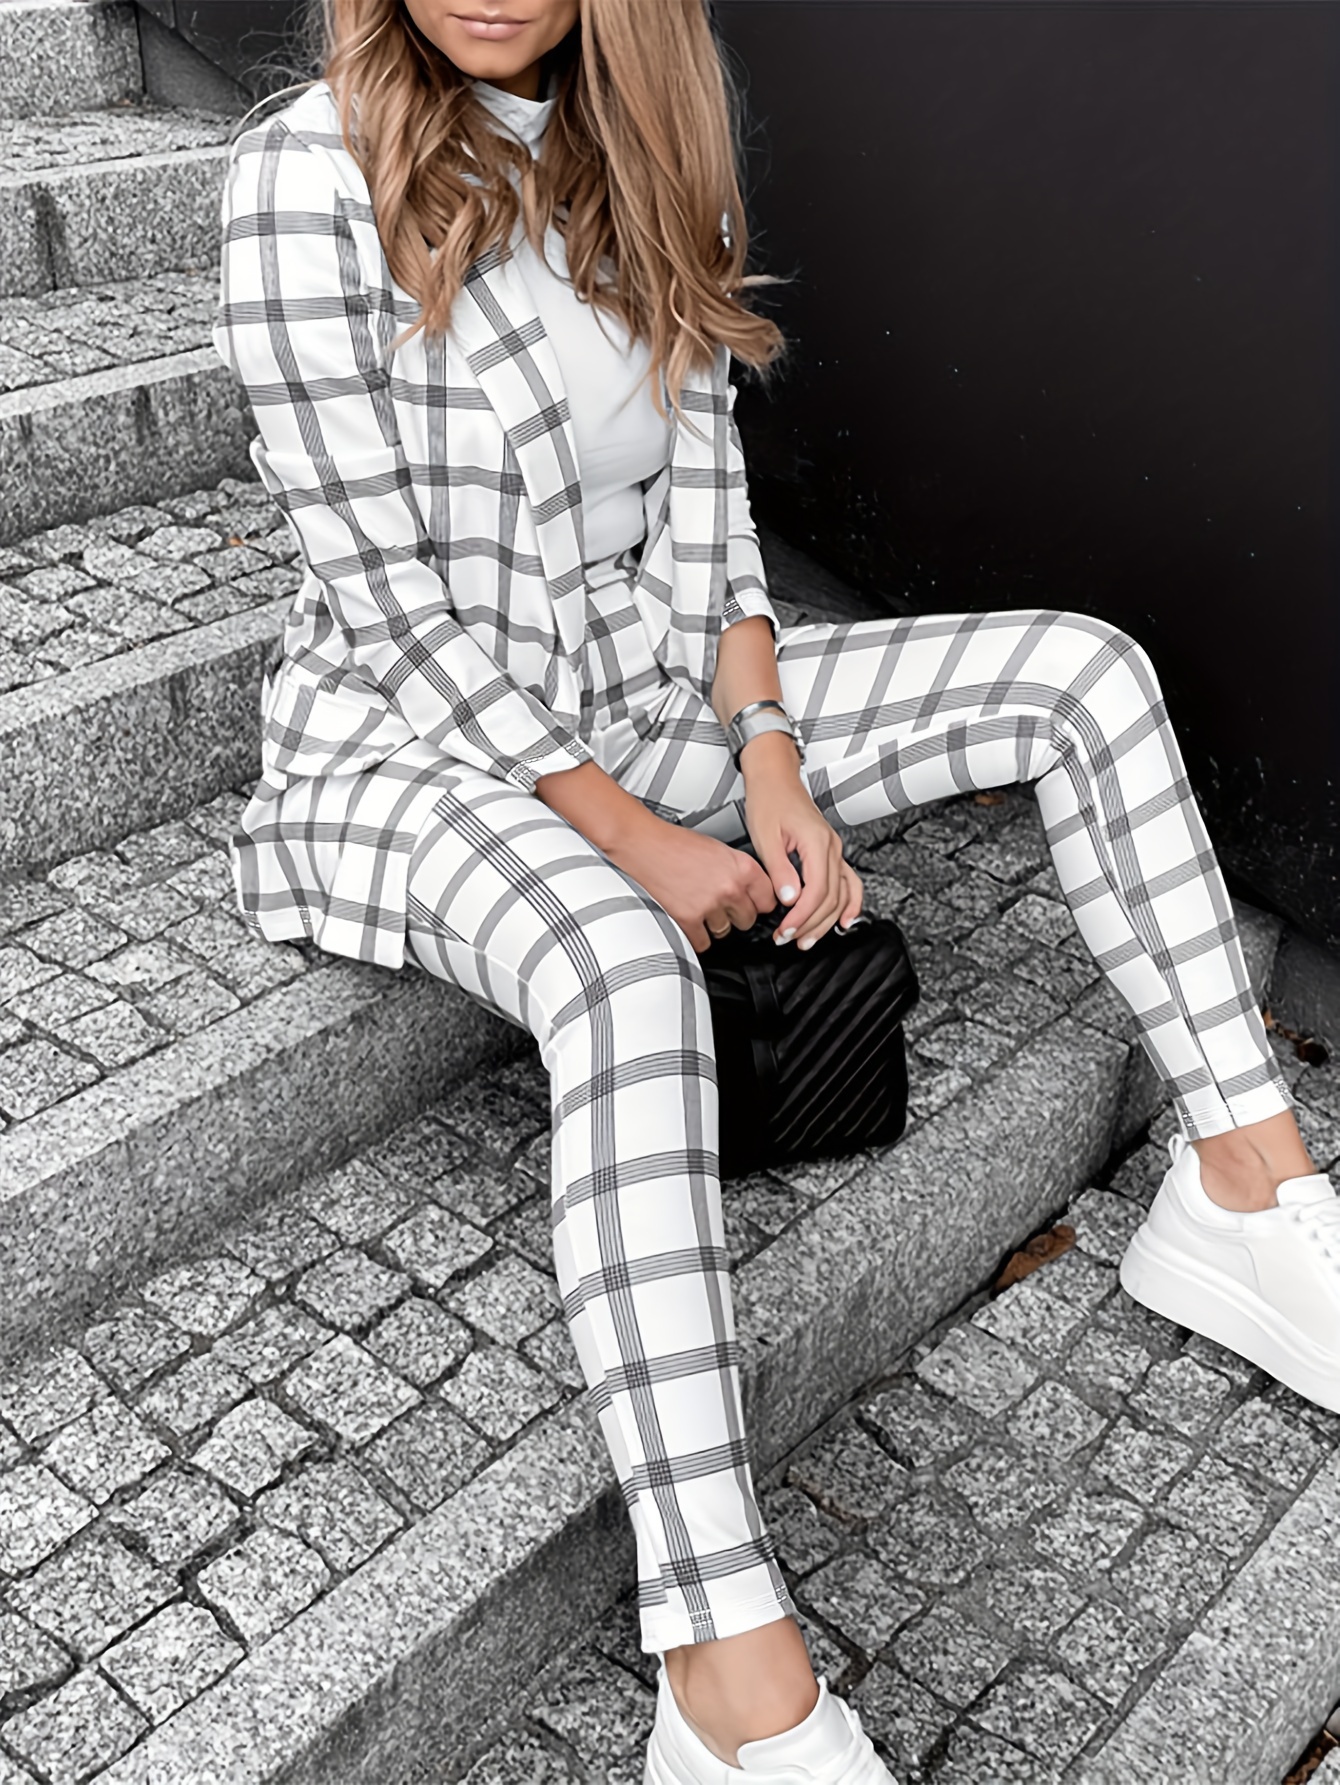 Buy New Slim Ladies Office Pants Fashion Checkered Career Trousers